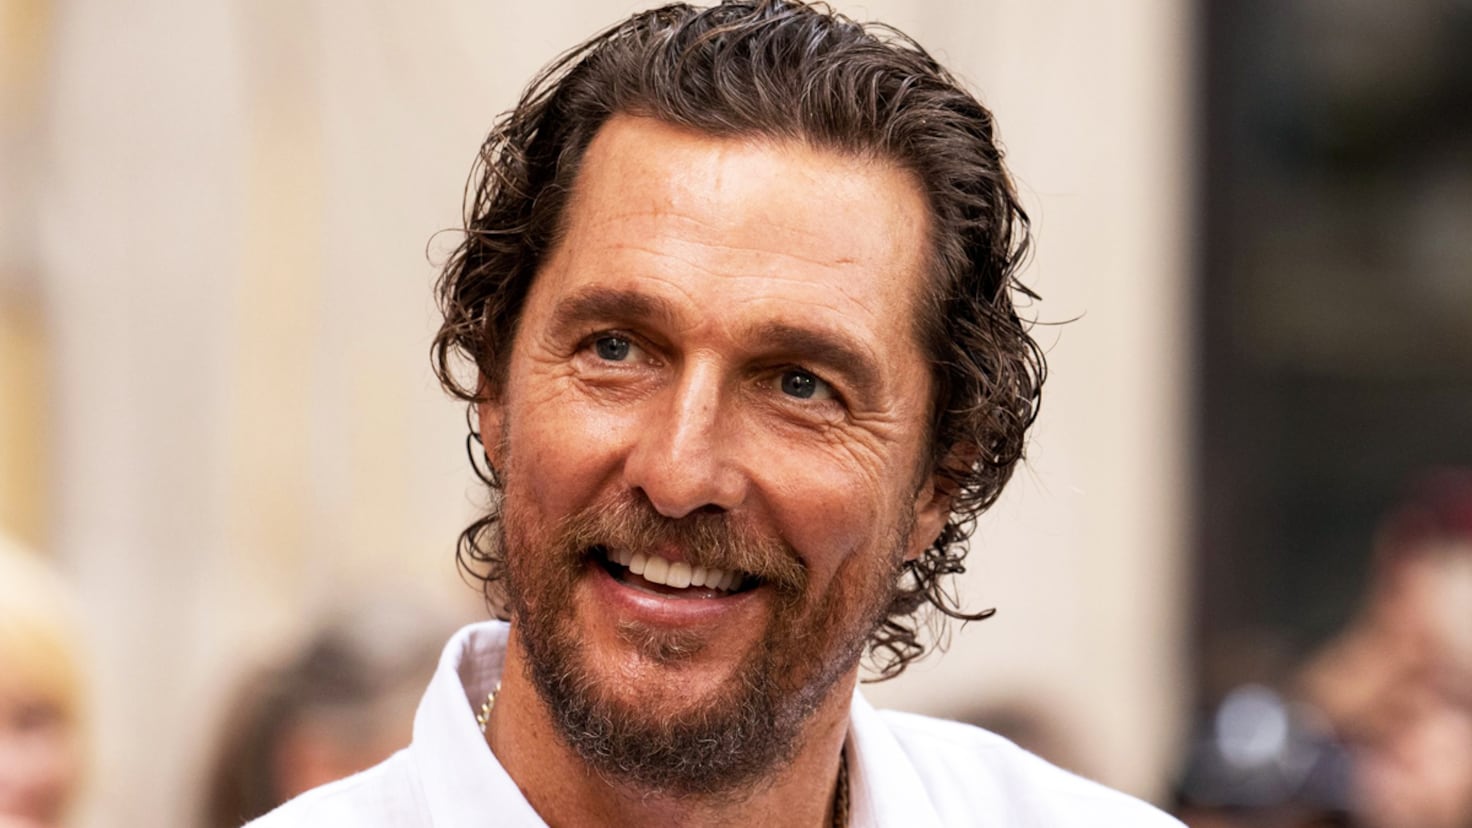 Matthew McConaughey, unrecognizable after being stung by a bee
